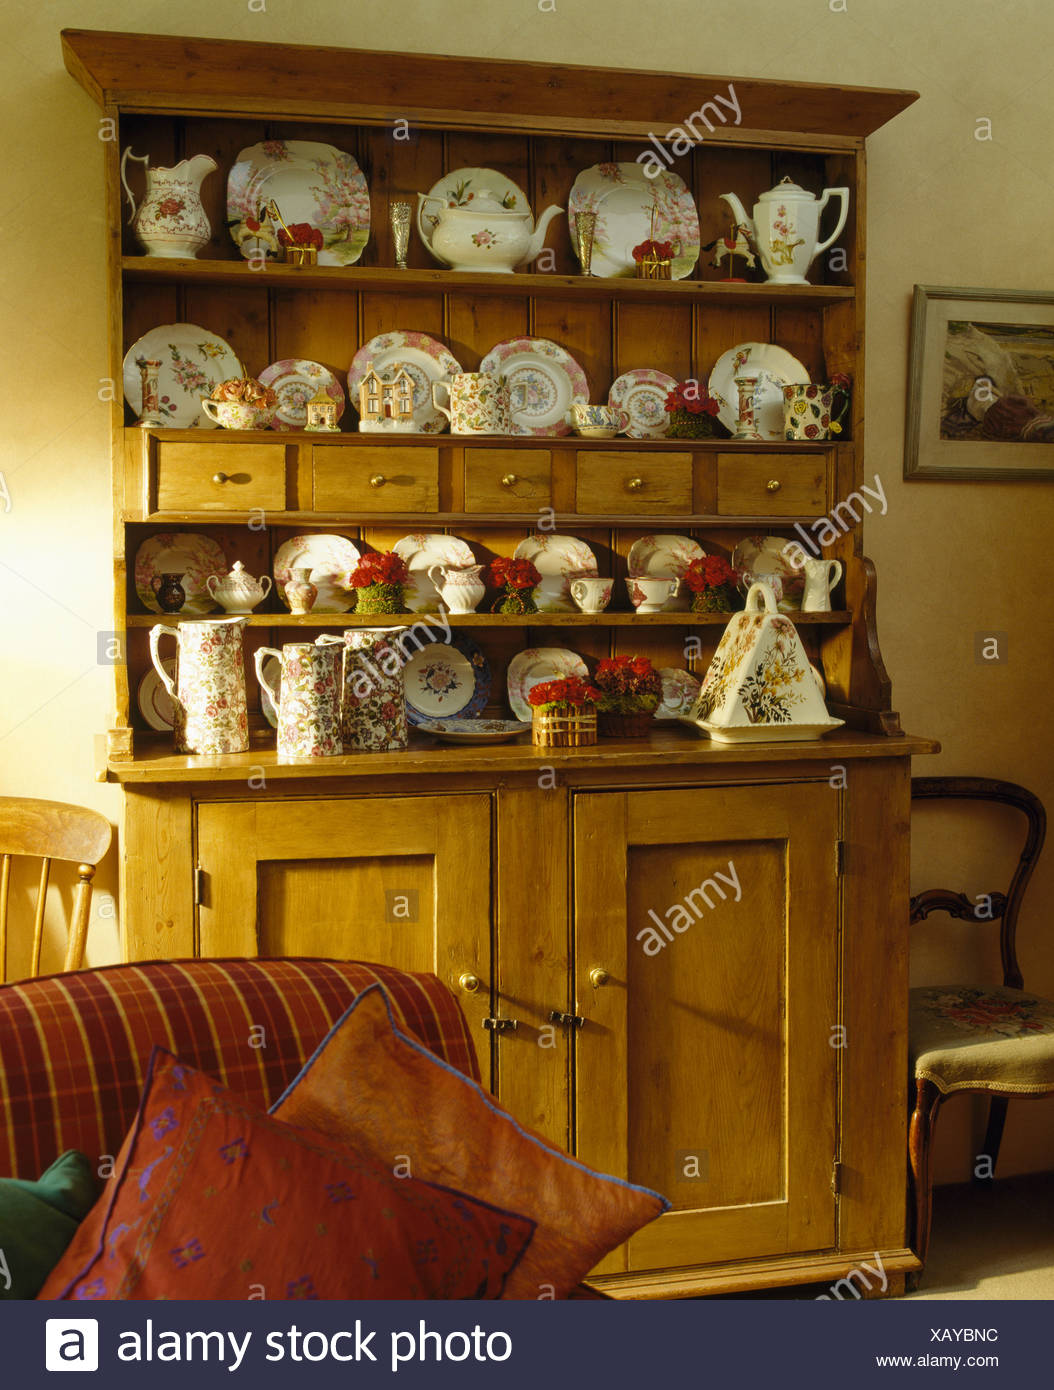 Collection Of Antique China On Old Pine Dresser In Cottage Dining